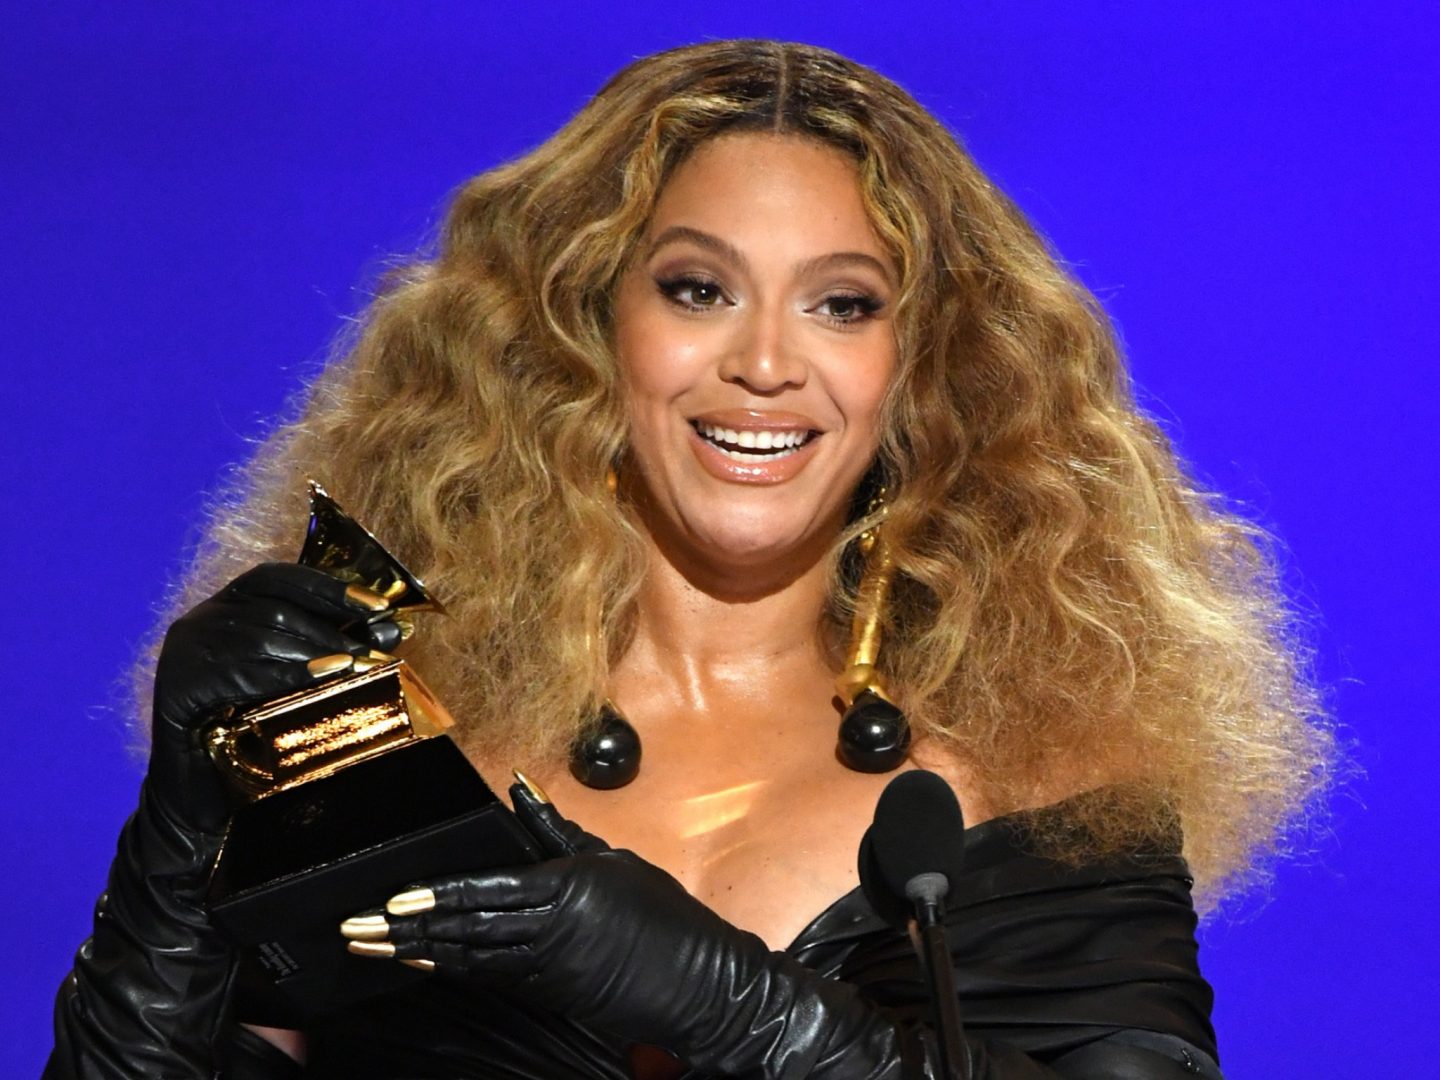 Beyoncé deletes all social media profile pictures; what does she have planned?